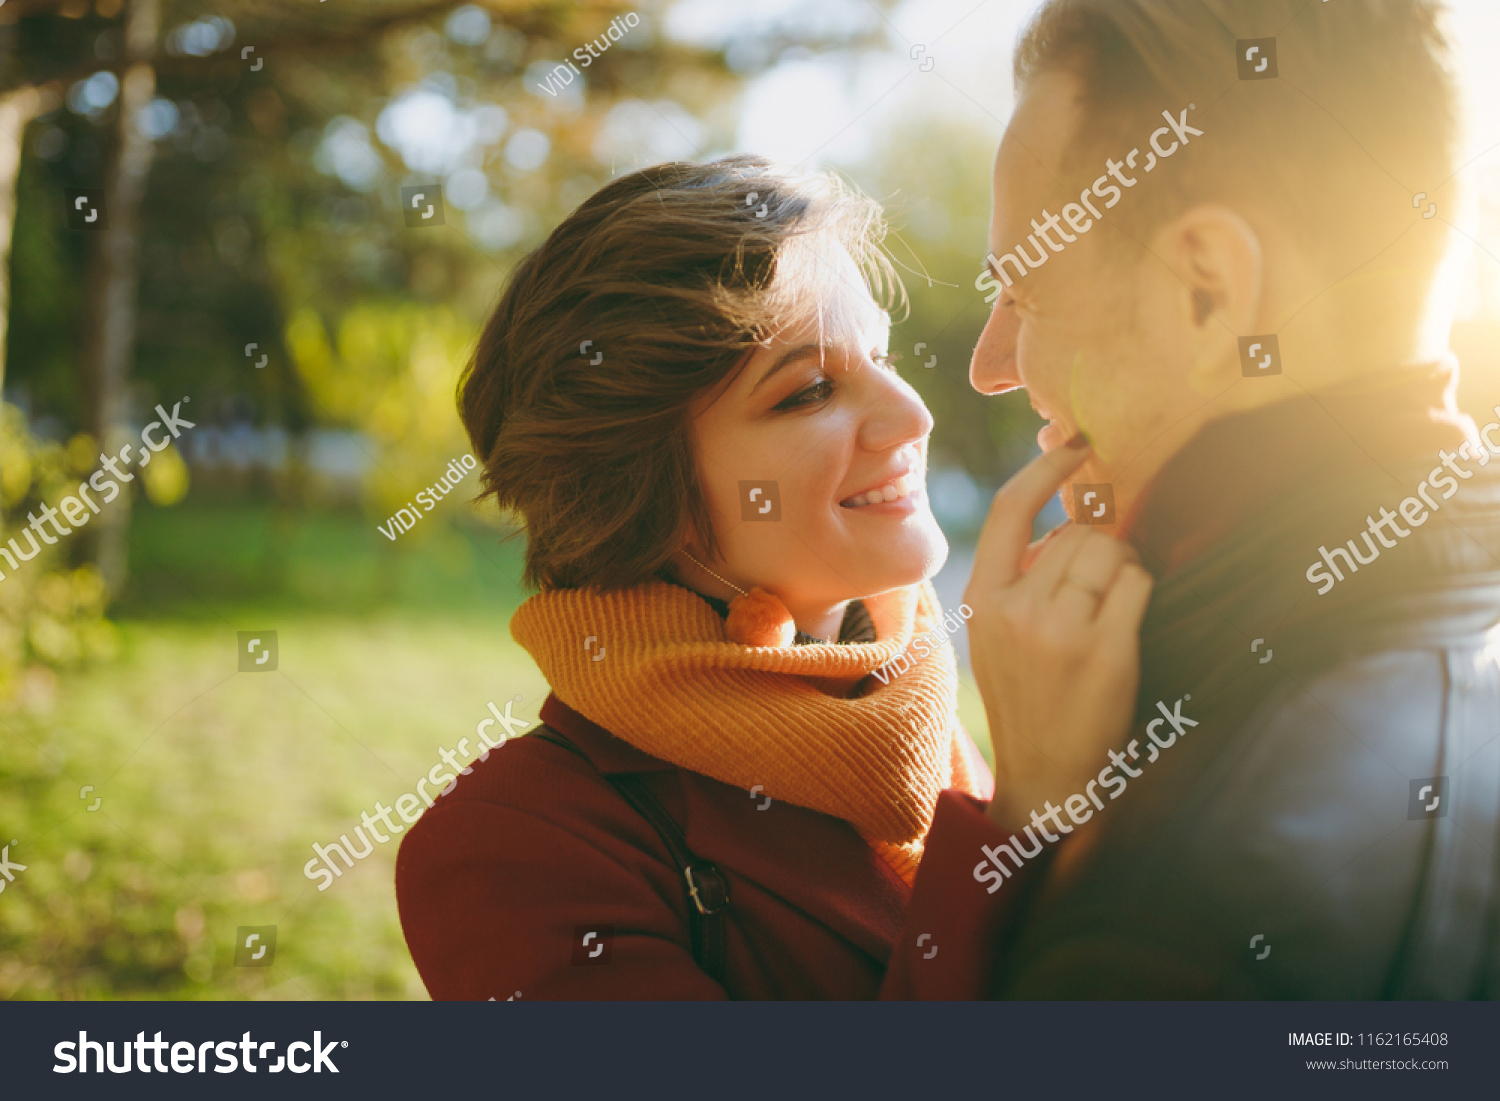 Close up of Young romantic couple smiling woman man in casual clothes embracing looking at each other on walk in autumn city park outdoors in sunny day. Love relationship family lifestyle concept #1162165408